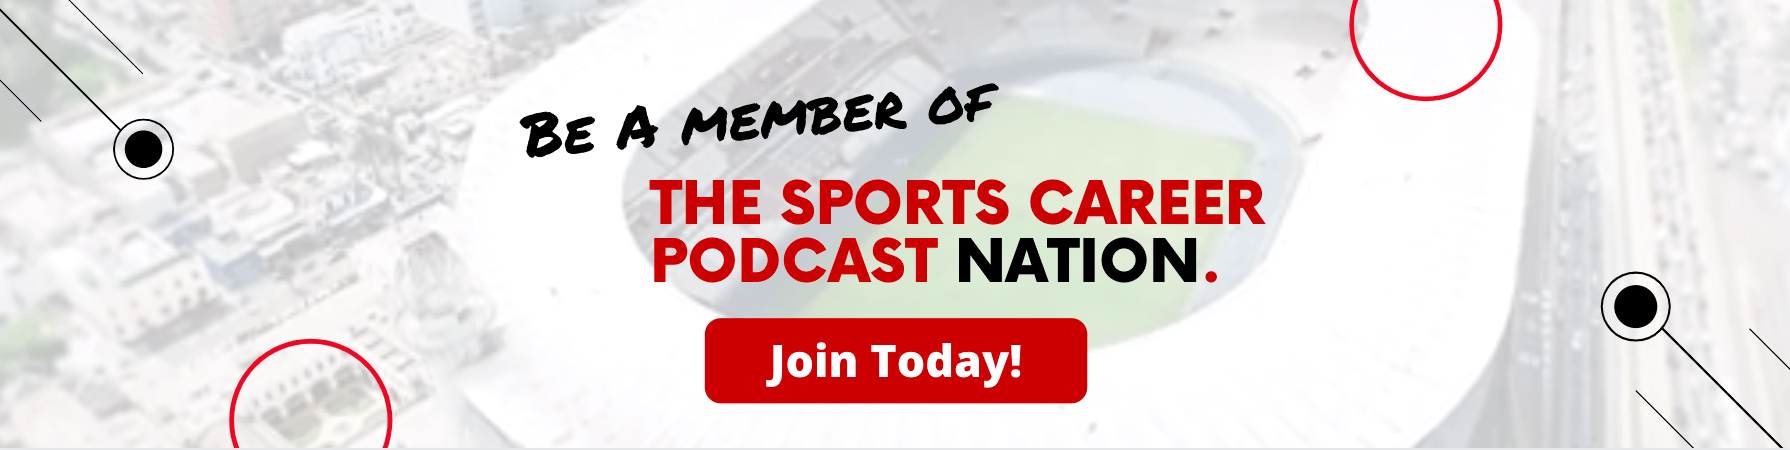 The Sports Career Podcast Nation